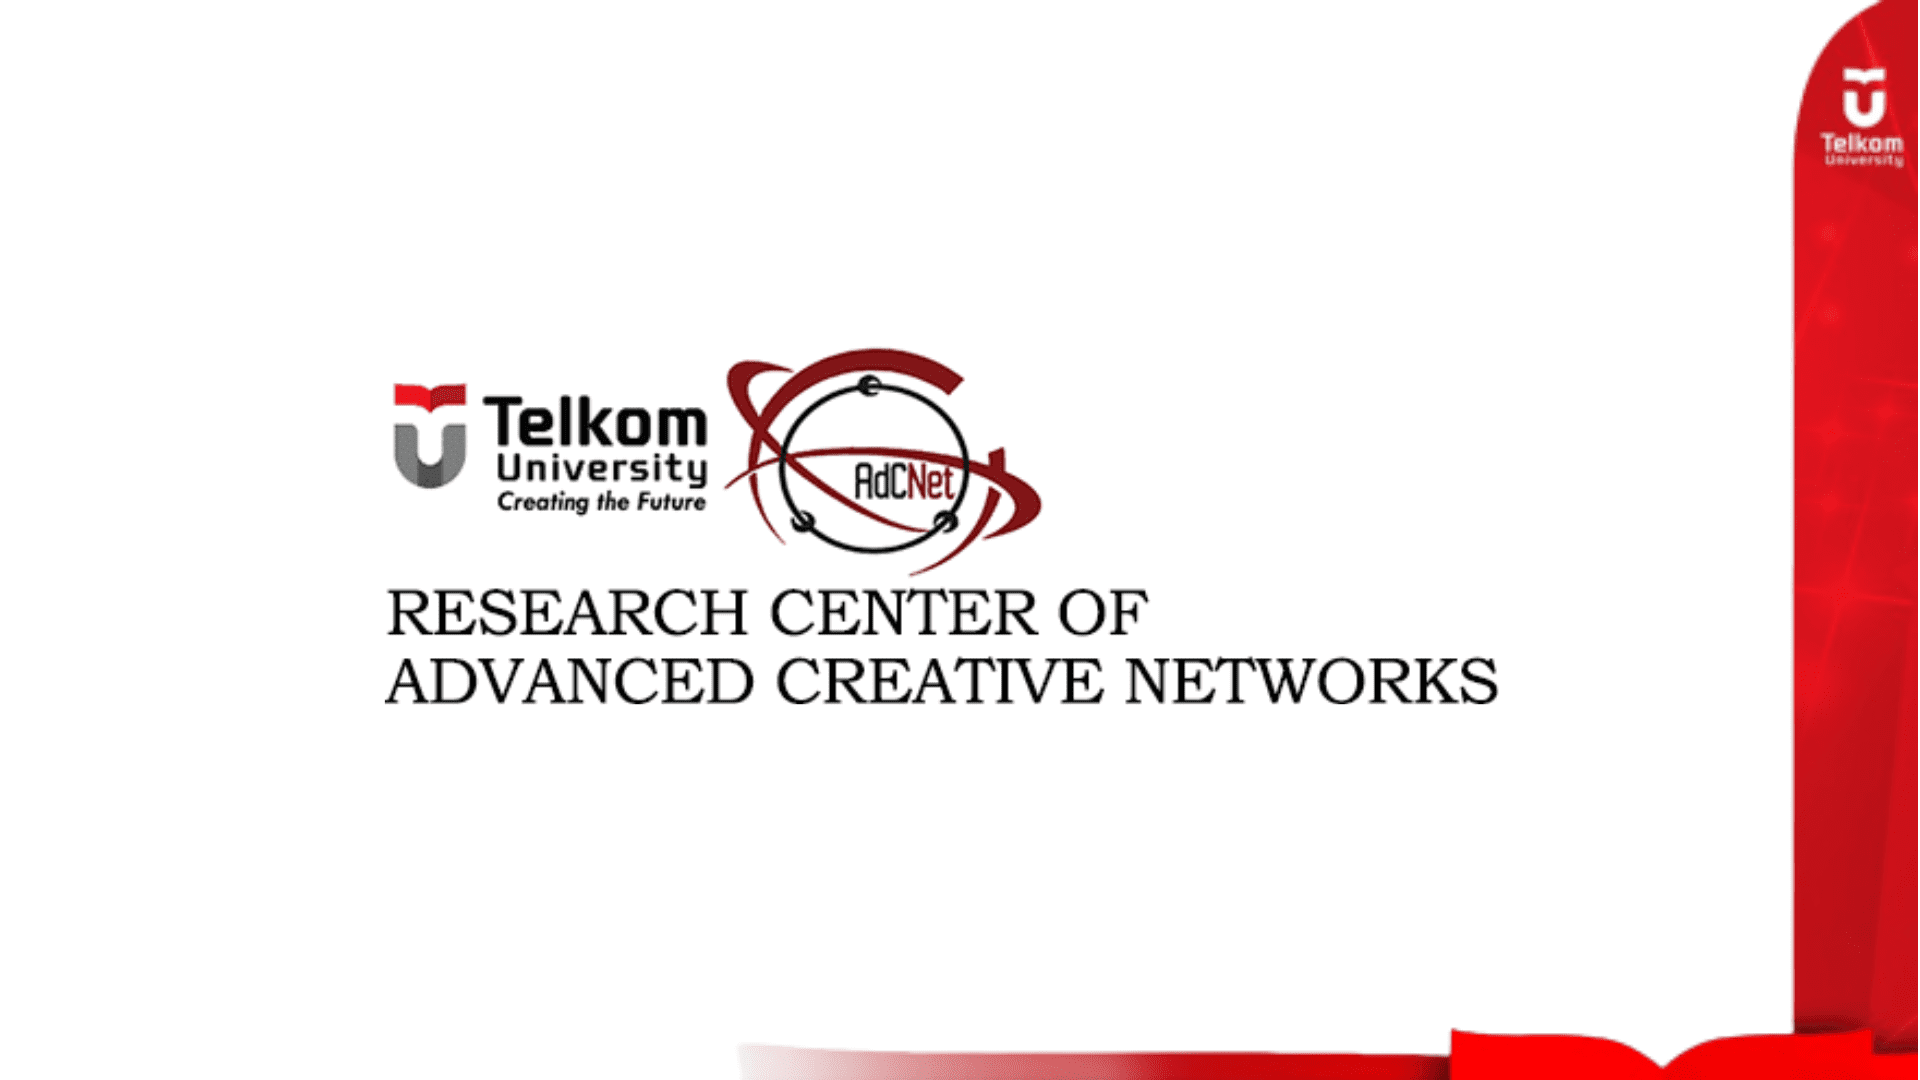 Advanced Creative Networks Research Center or RC AdCNet